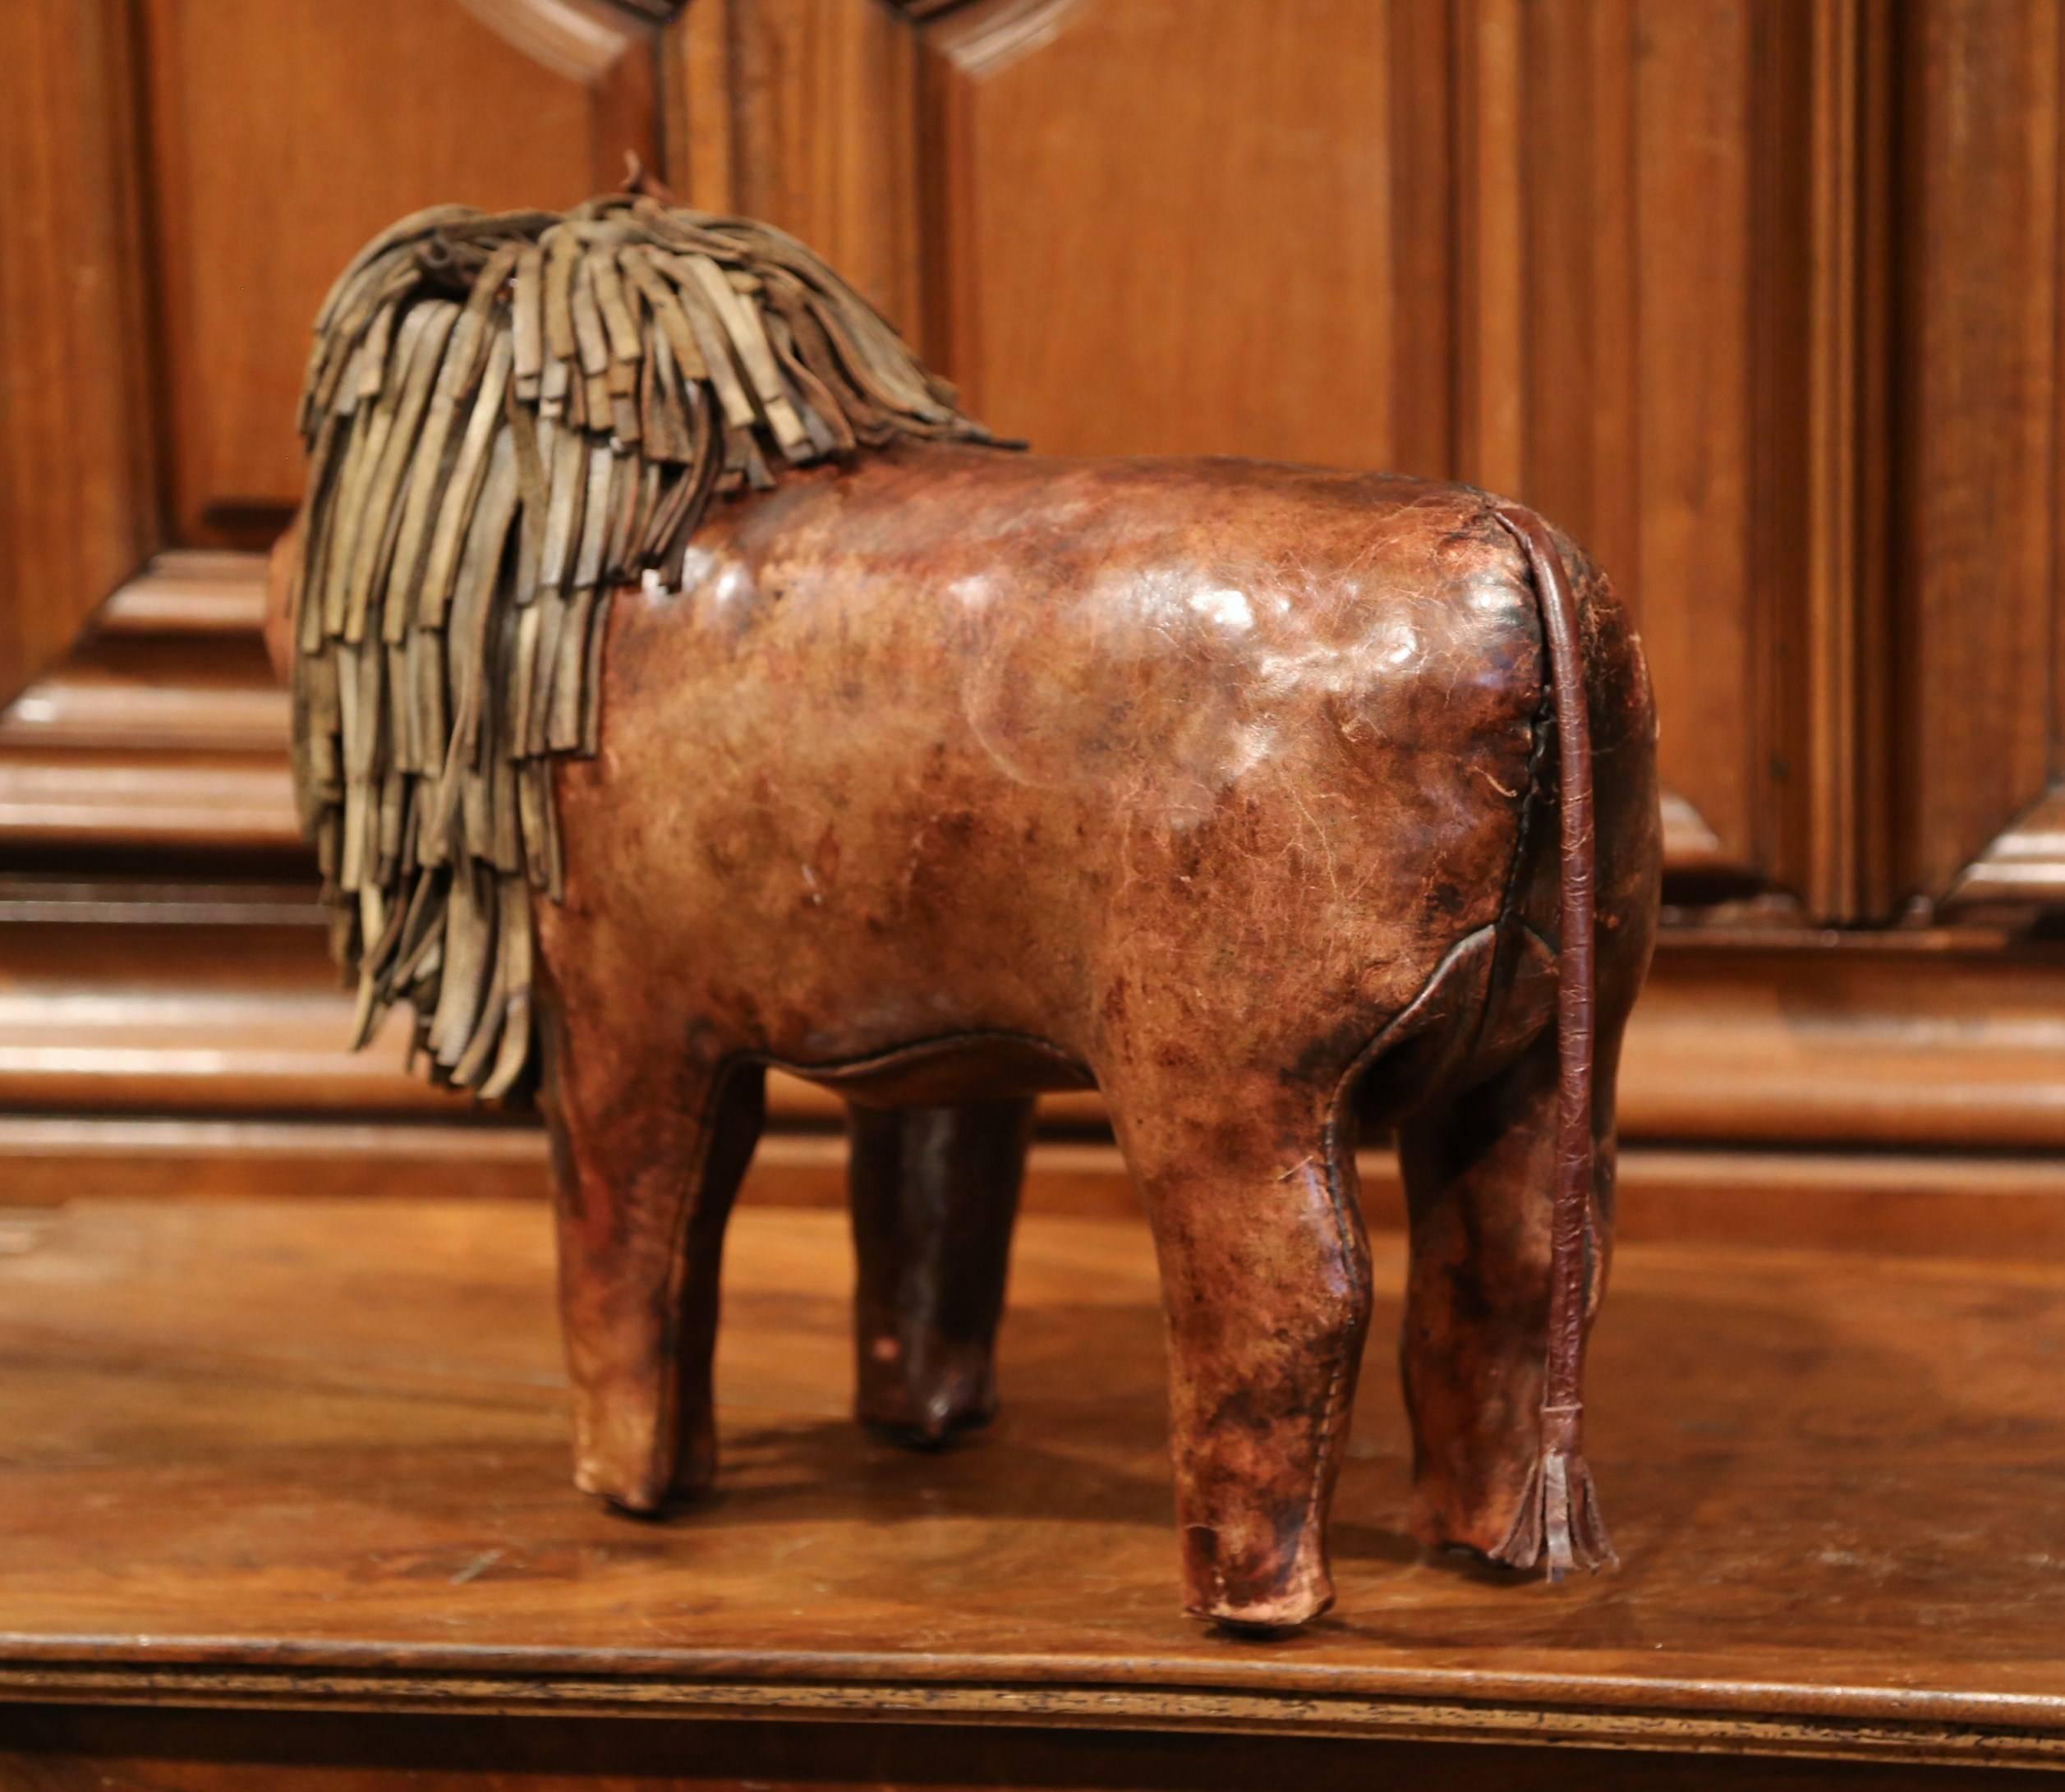 19th century English Foot Stool Lion Sculpture with Original Brown Leather 2